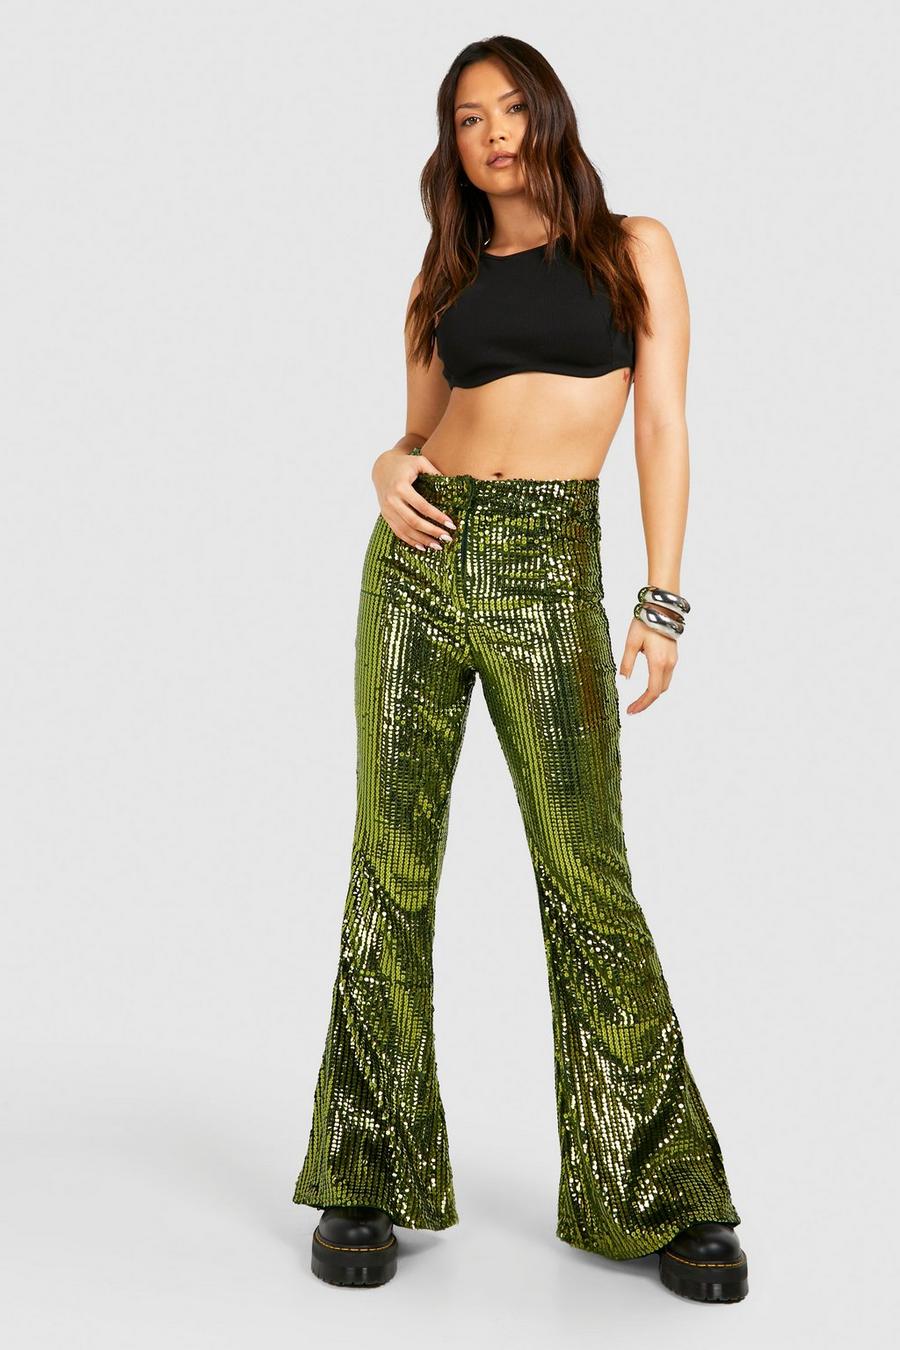 Chartreuse High Waist Sequin Flare Pants image number 1